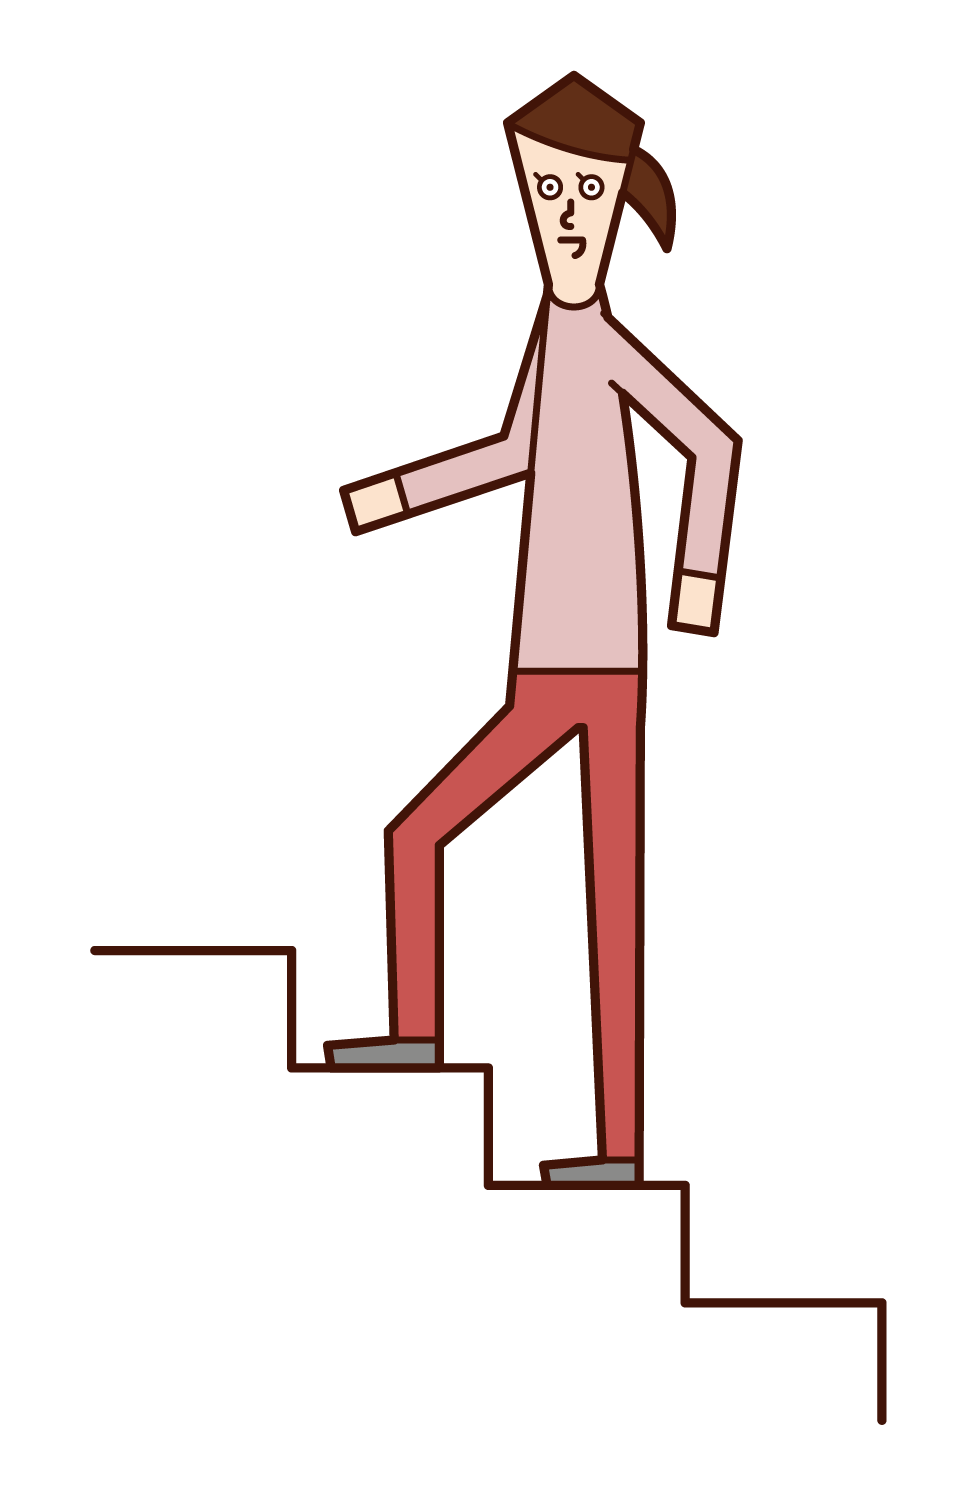 Illustration of a woman going up the stairs